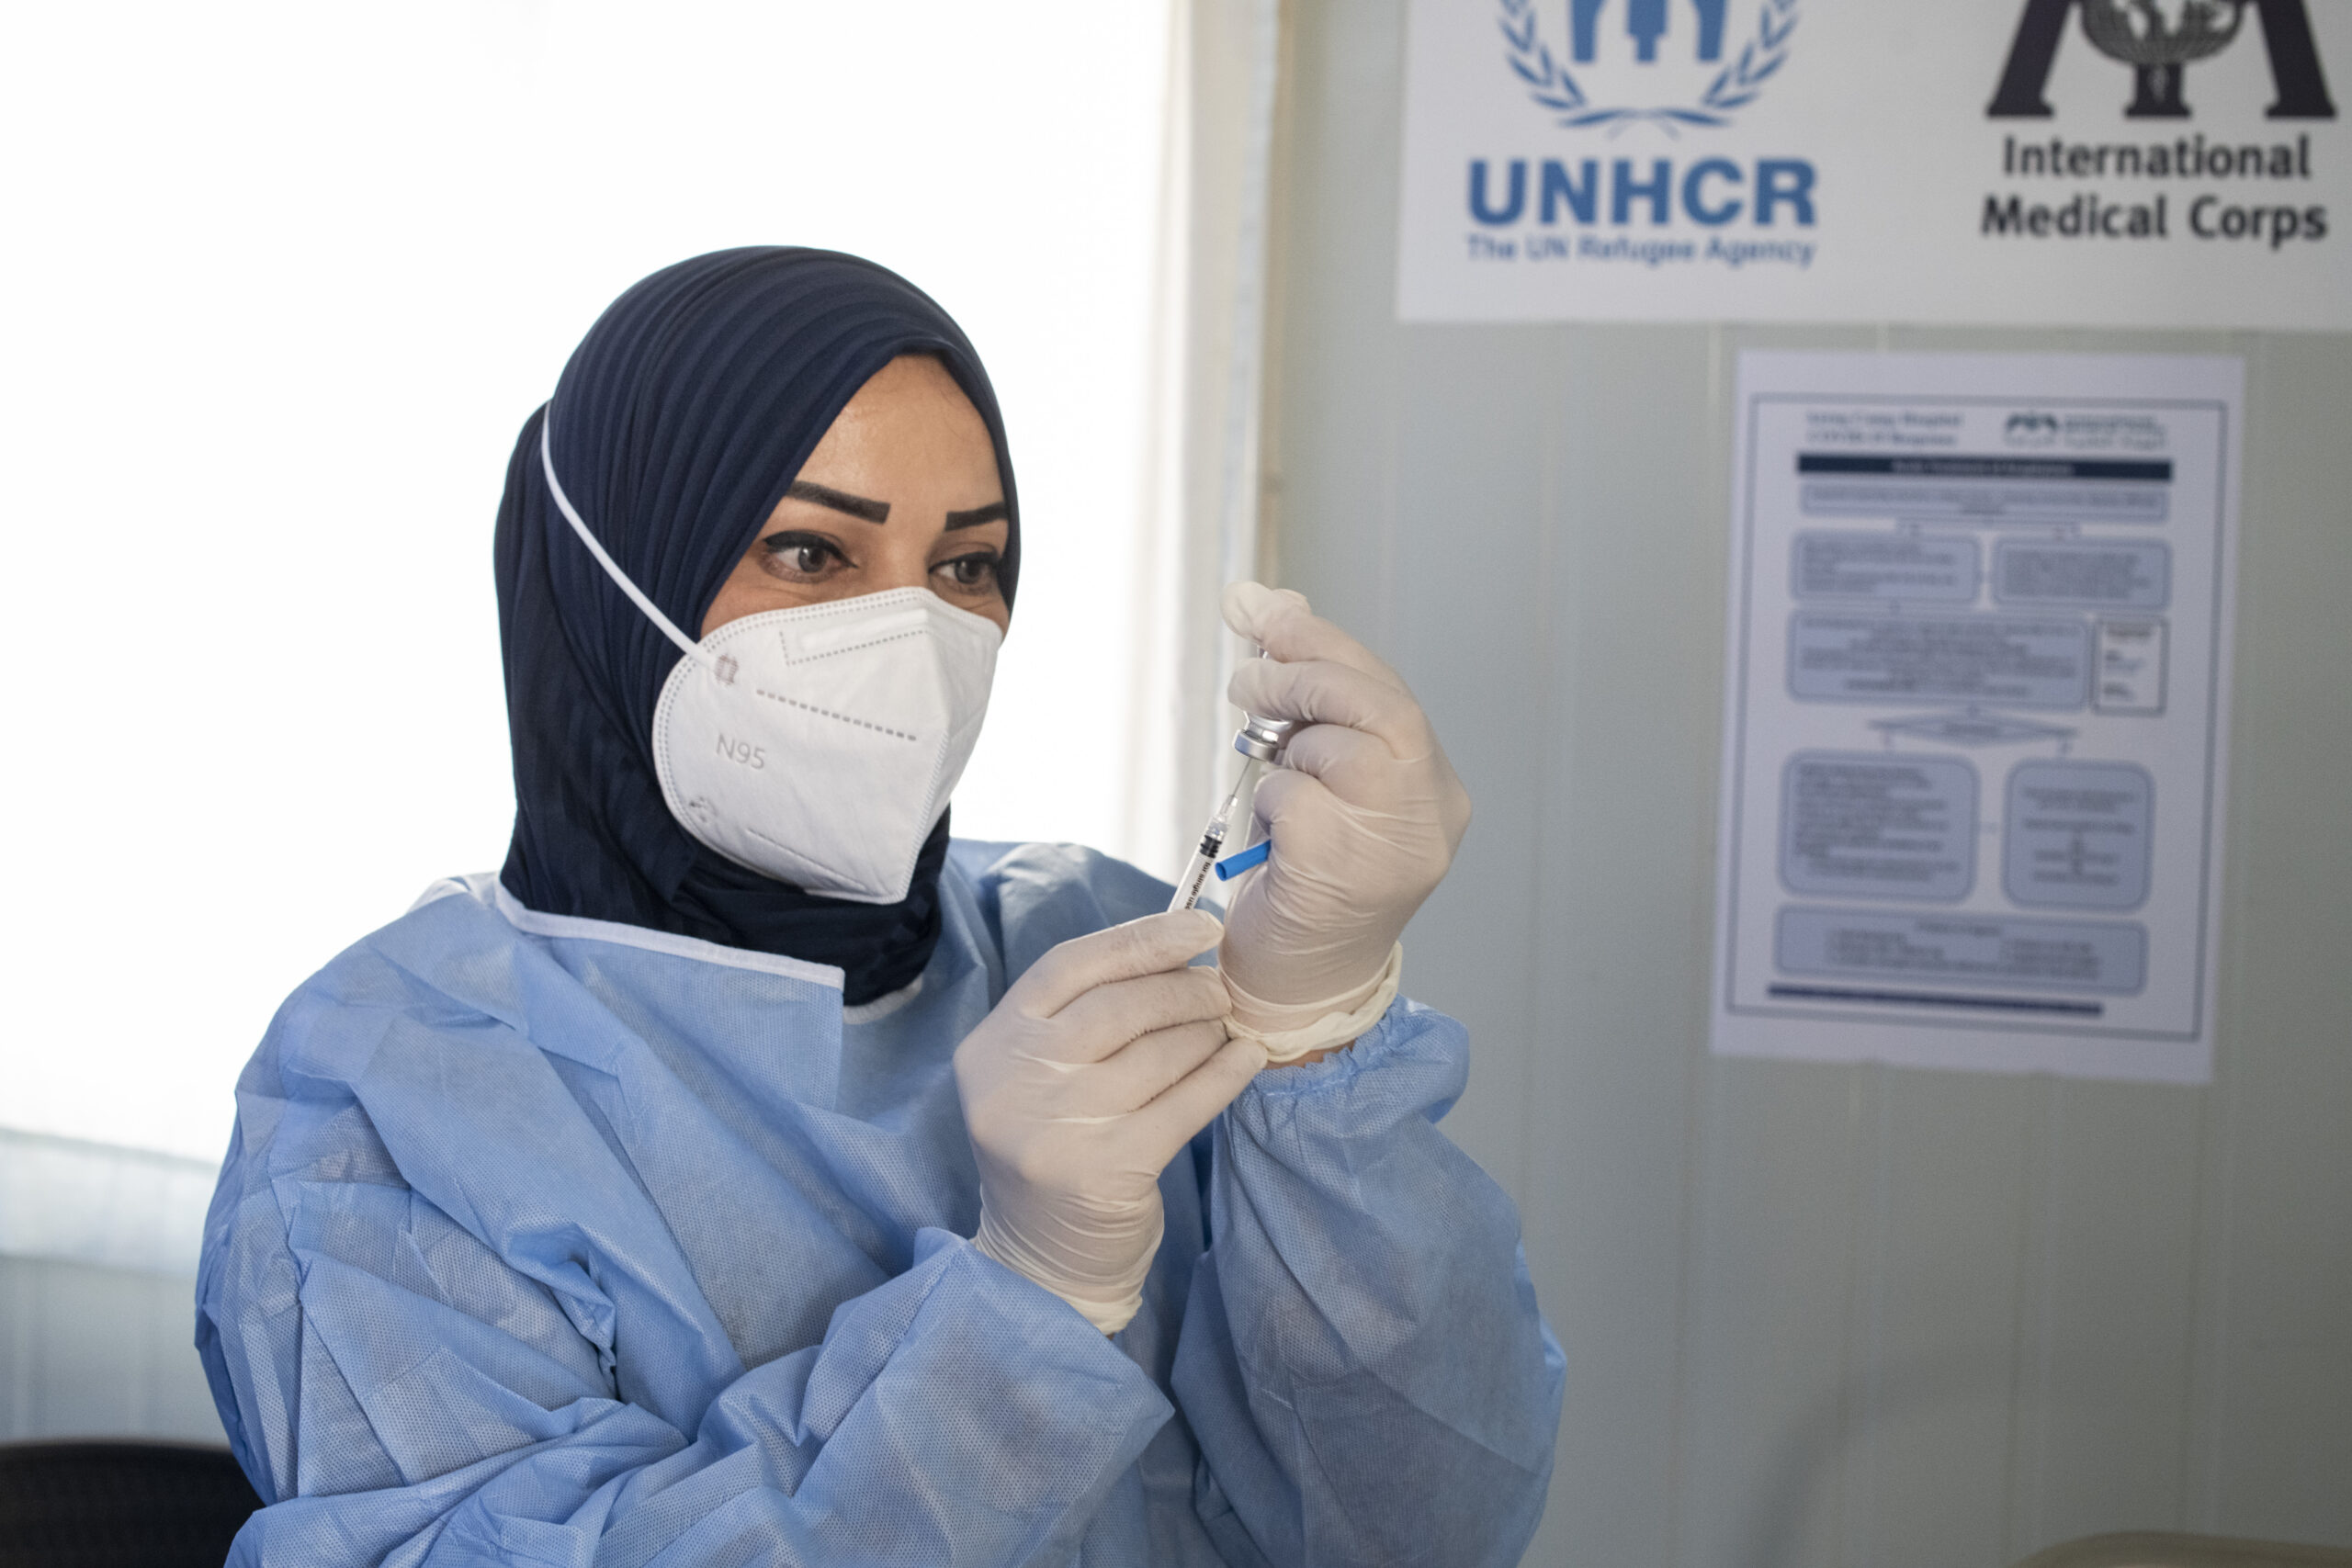 In Jordan, we are continuing to work with the Ministry of Health to provide vaccination services in Azraq and Zaatari refugee camps.